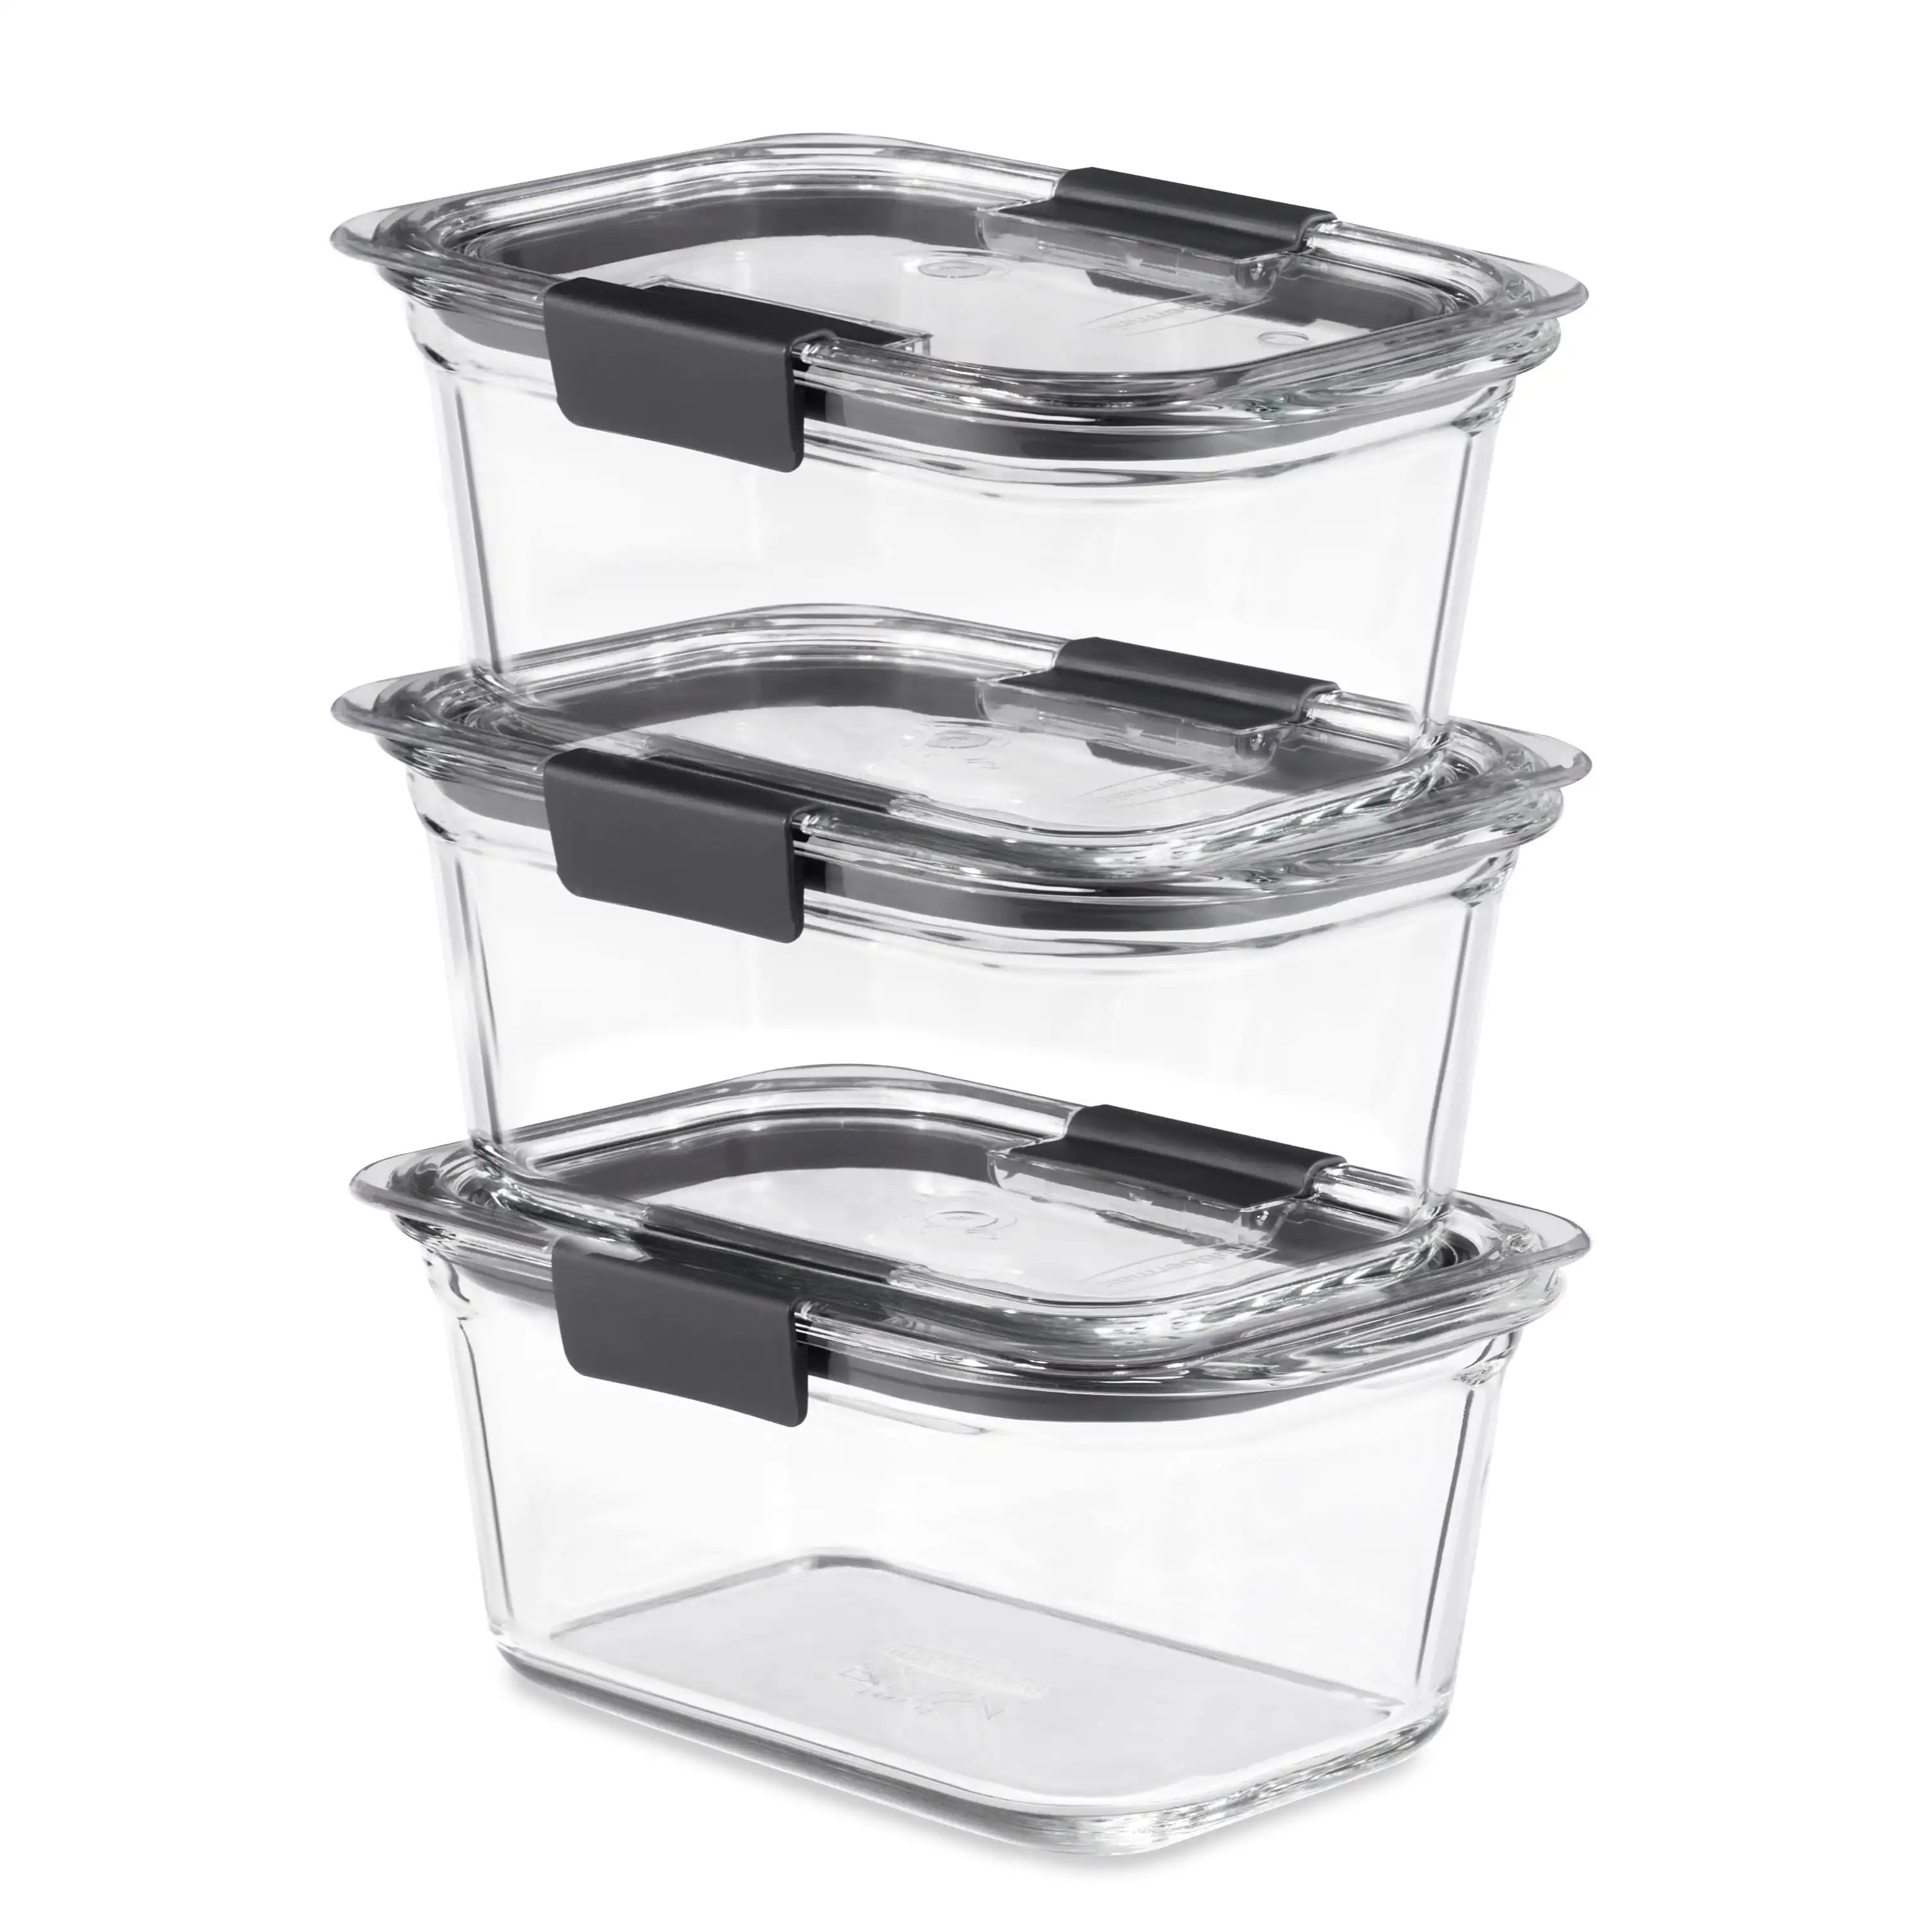 https://ae01.alicdn.com/kf/S61241f506c8d47eb8e37924ef42175a6h/Rubbermaid-Brilliance-3-Pack-Glass-Food-Storage-Containers-4-7-Cup-Leak-Proof-BPA-Free.jpg